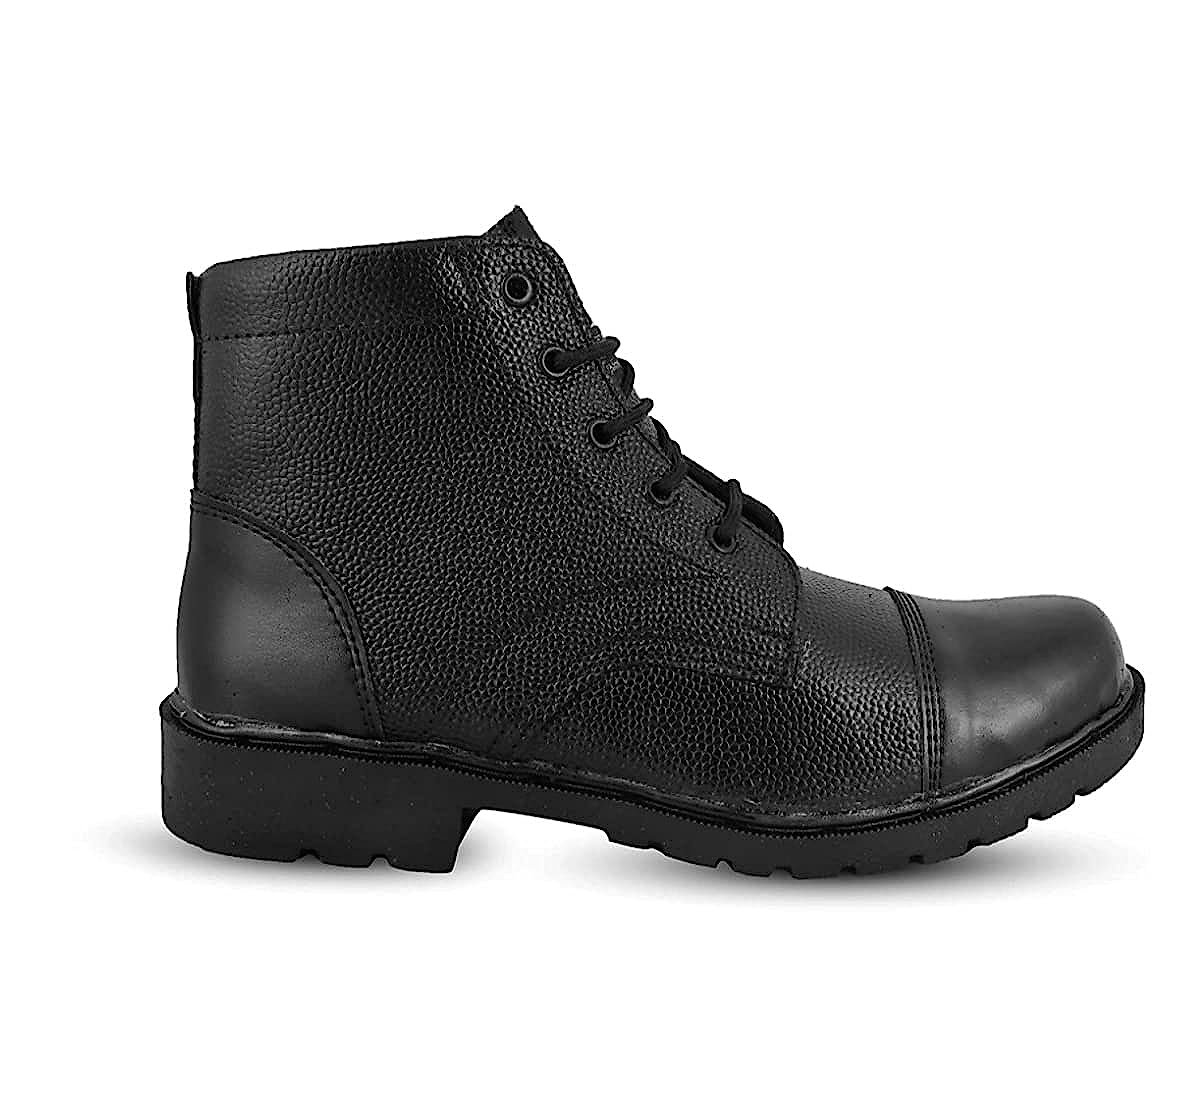 Leather Boots | Shoes | DMS Online at Best Price | Size 5 to 10, COD